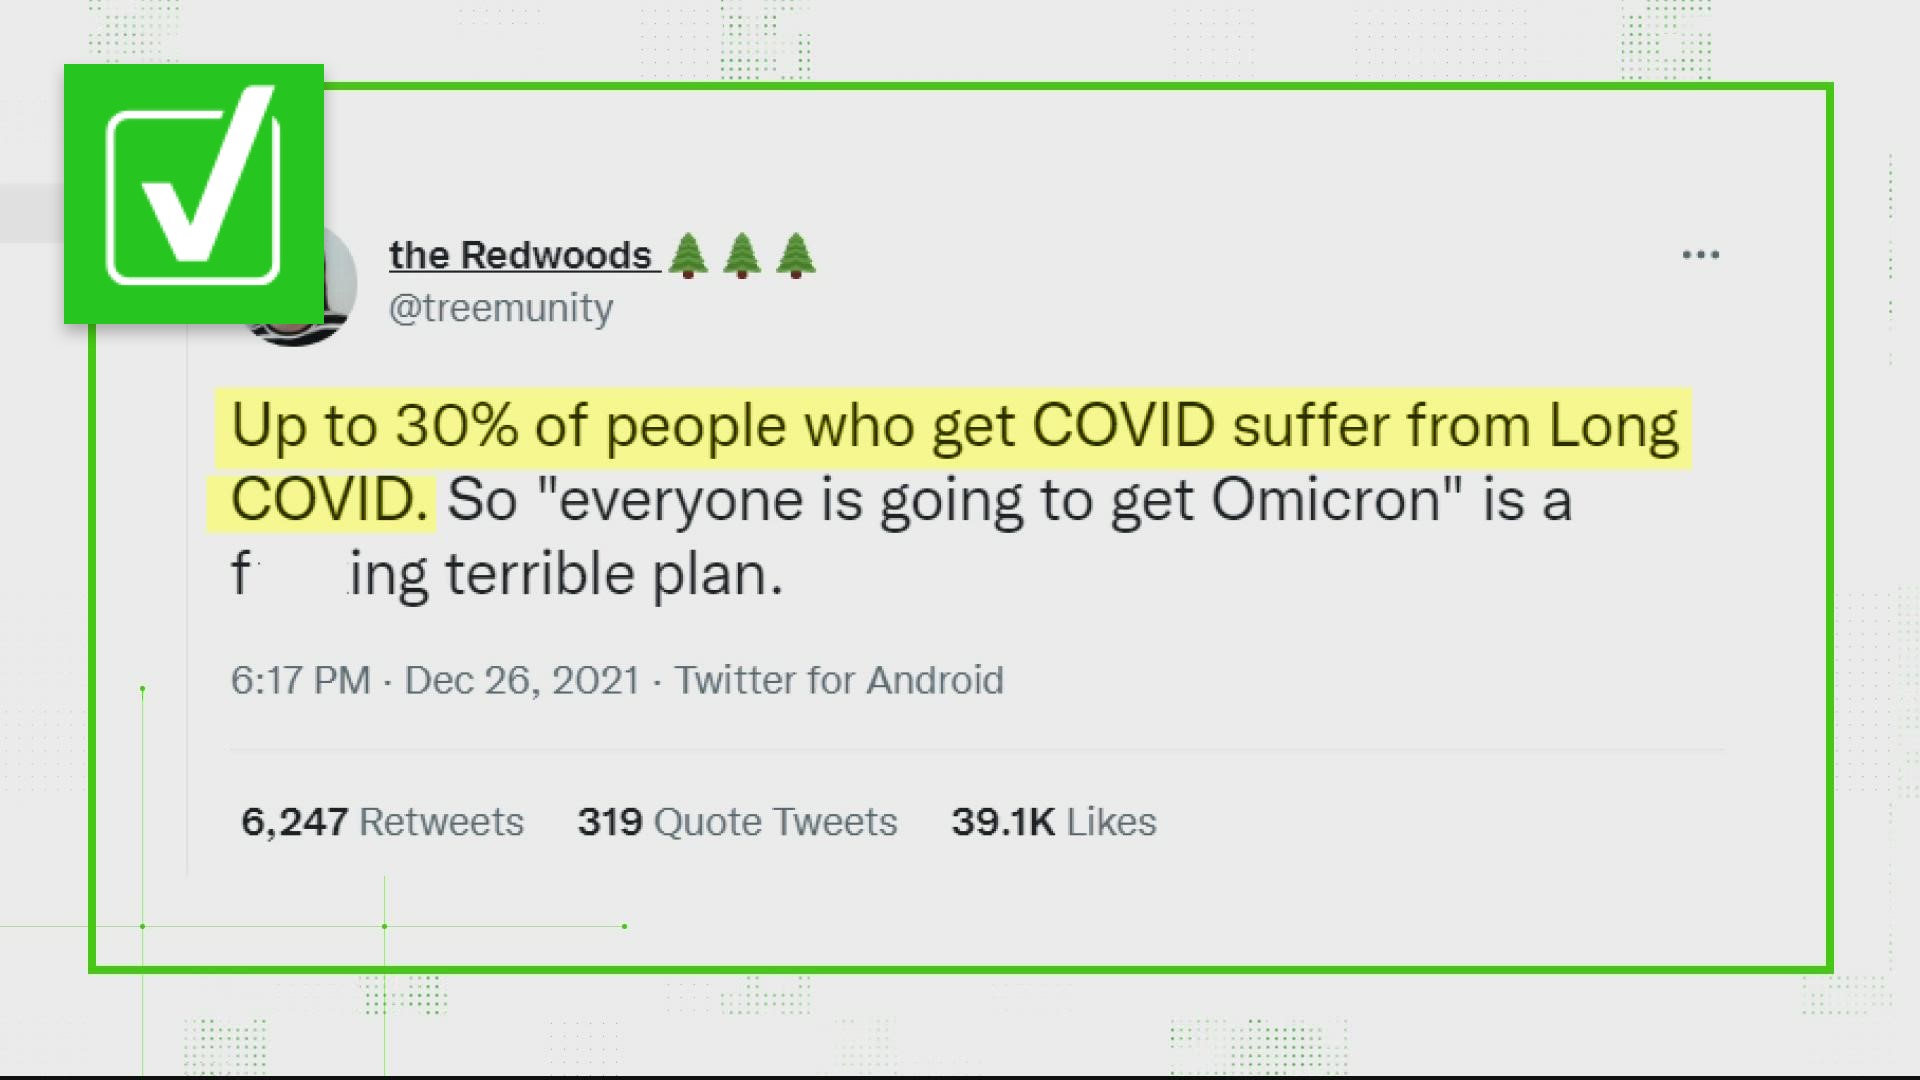 One tweet that was shared thousands of times claims 30% of people who get COVID suffer from 'Long COVID.' Is that true? We Verify.